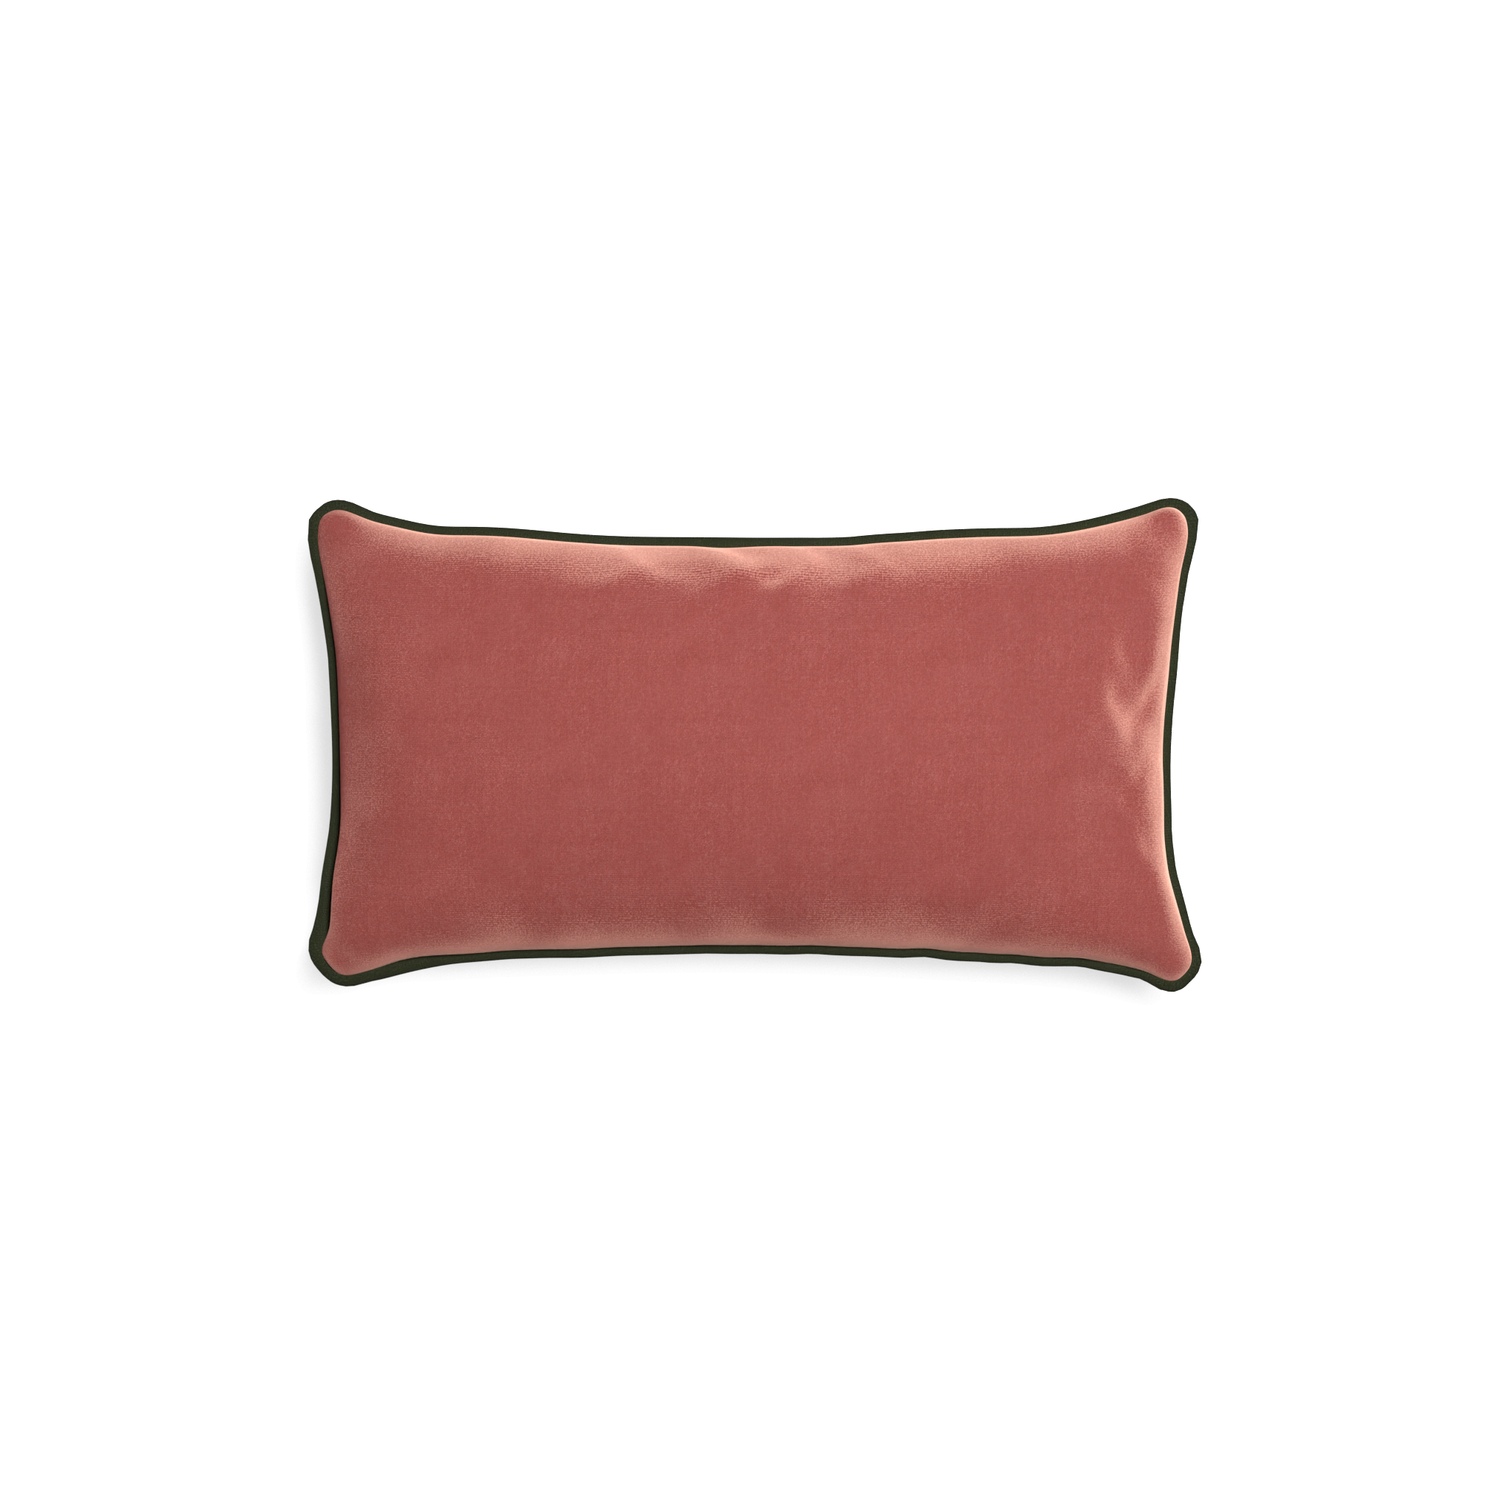 rectangle coral velvet pillow with fern green piping